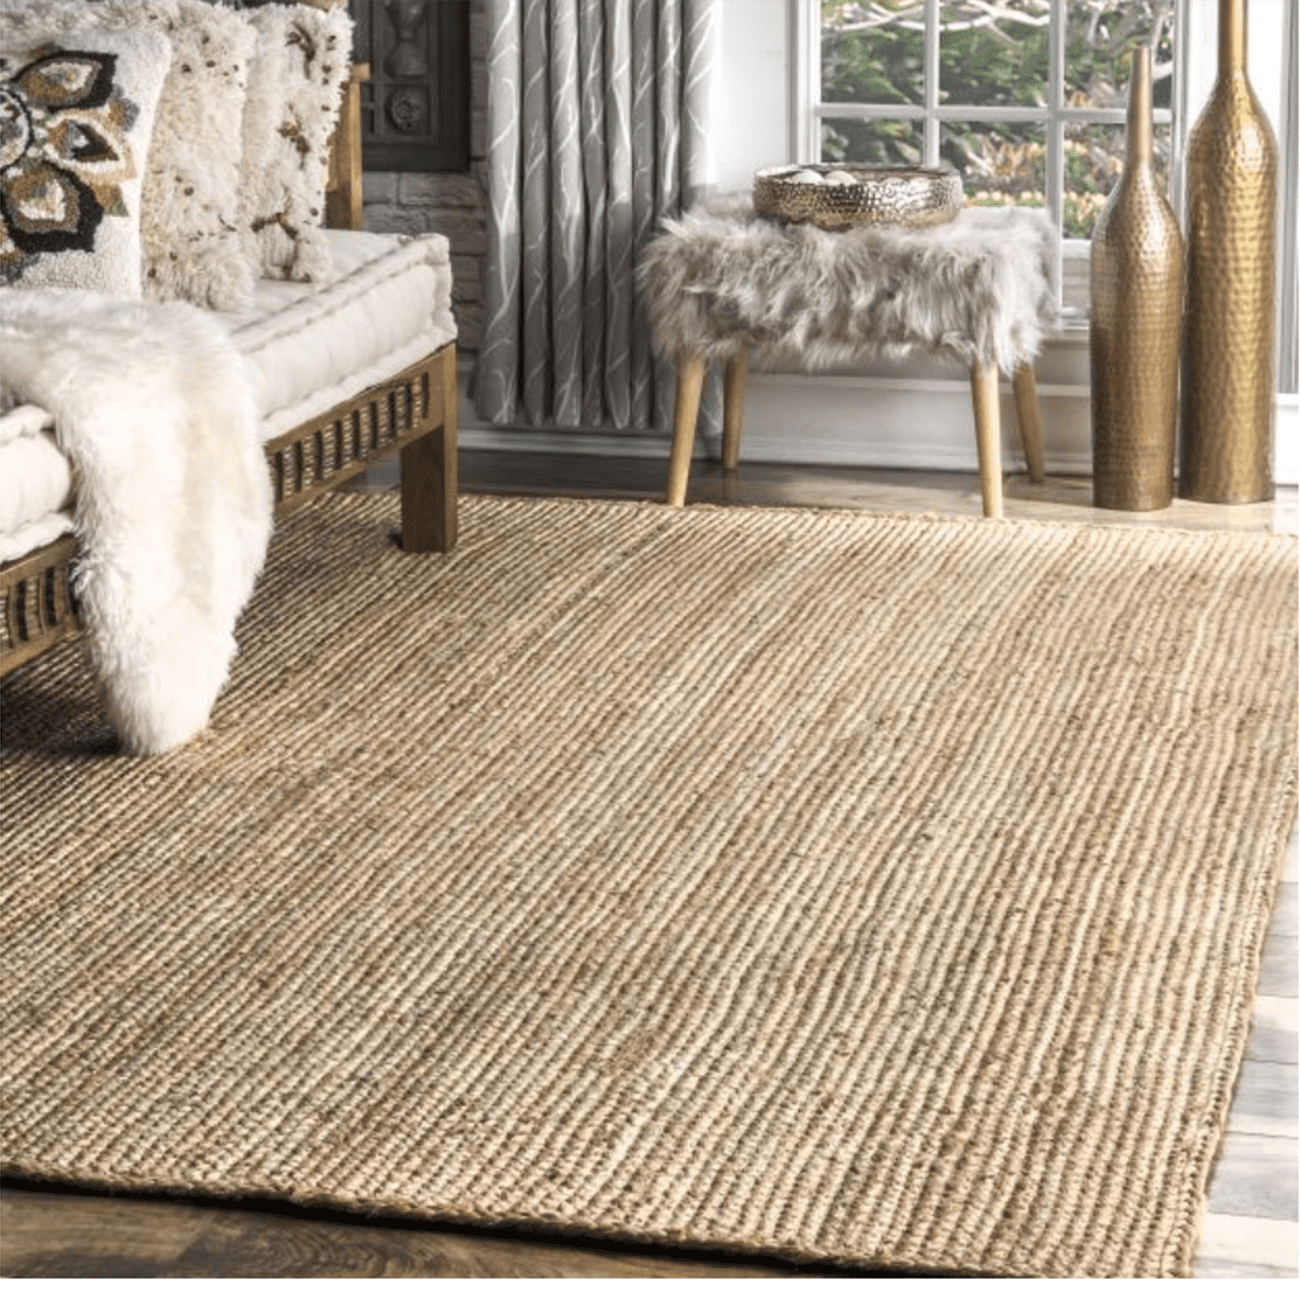 The Best Affordable Area Rugs Under 300